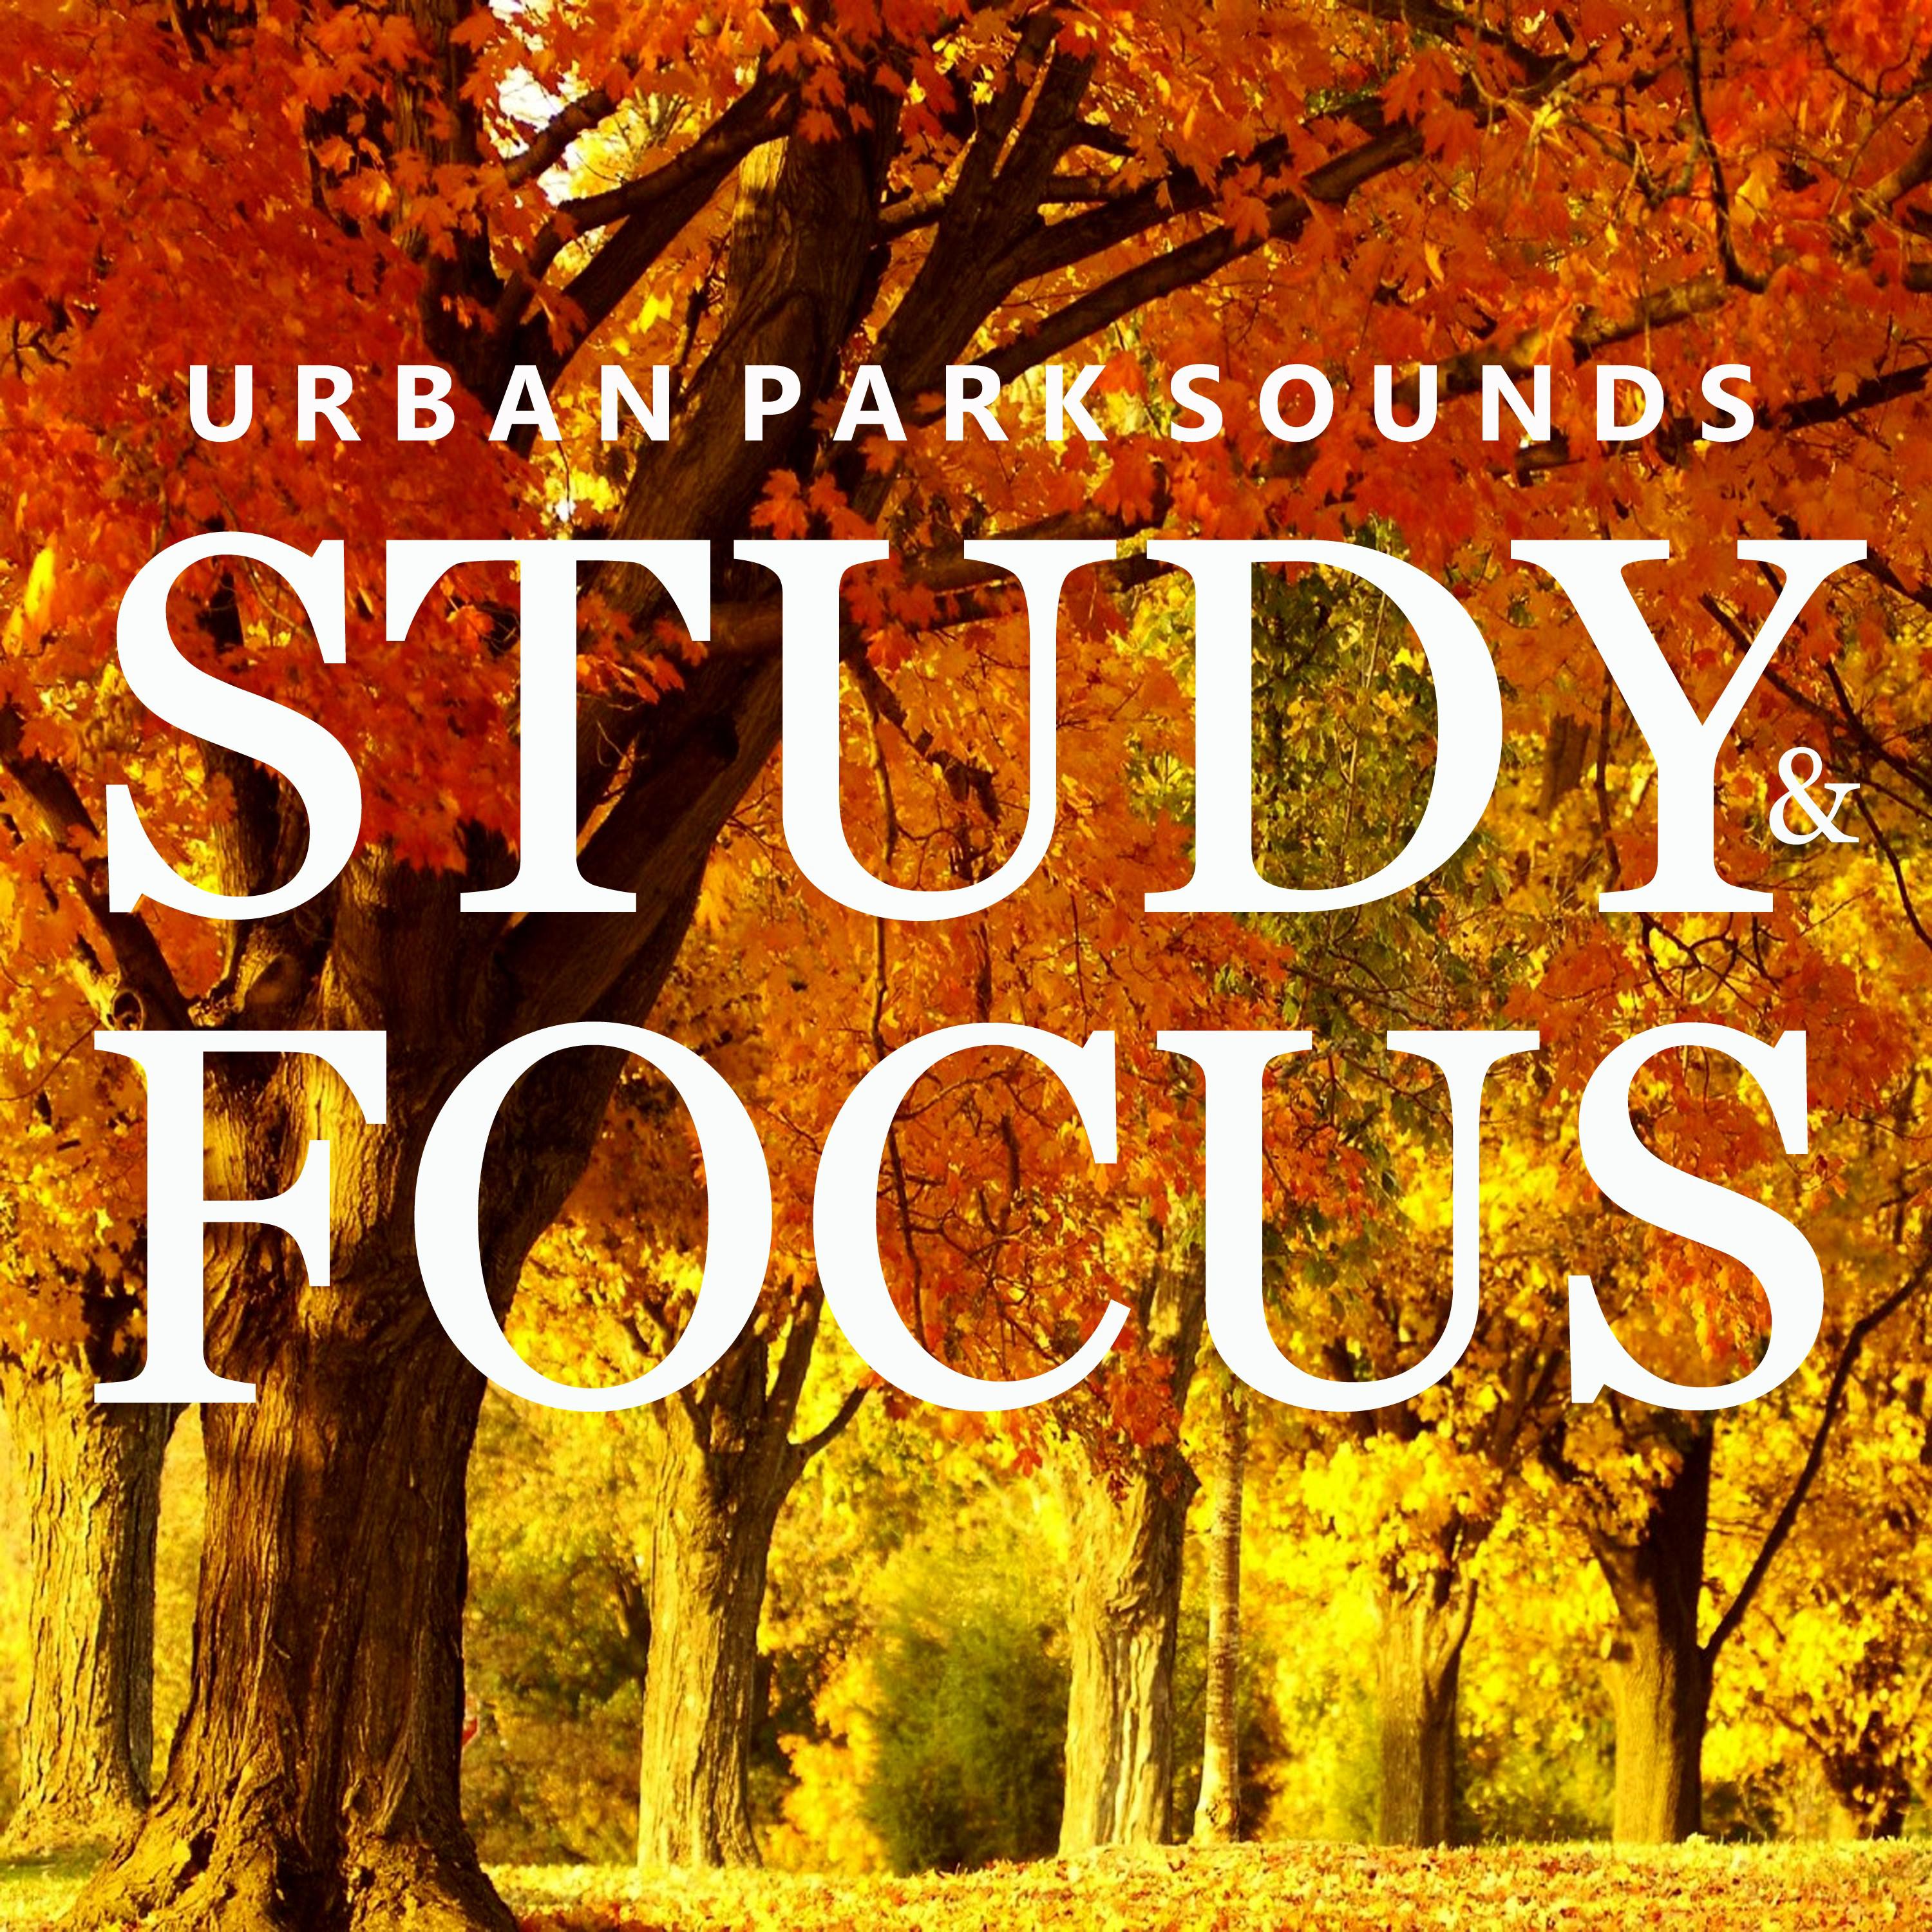 Urban Park Sounds for Studying, Pt. 34